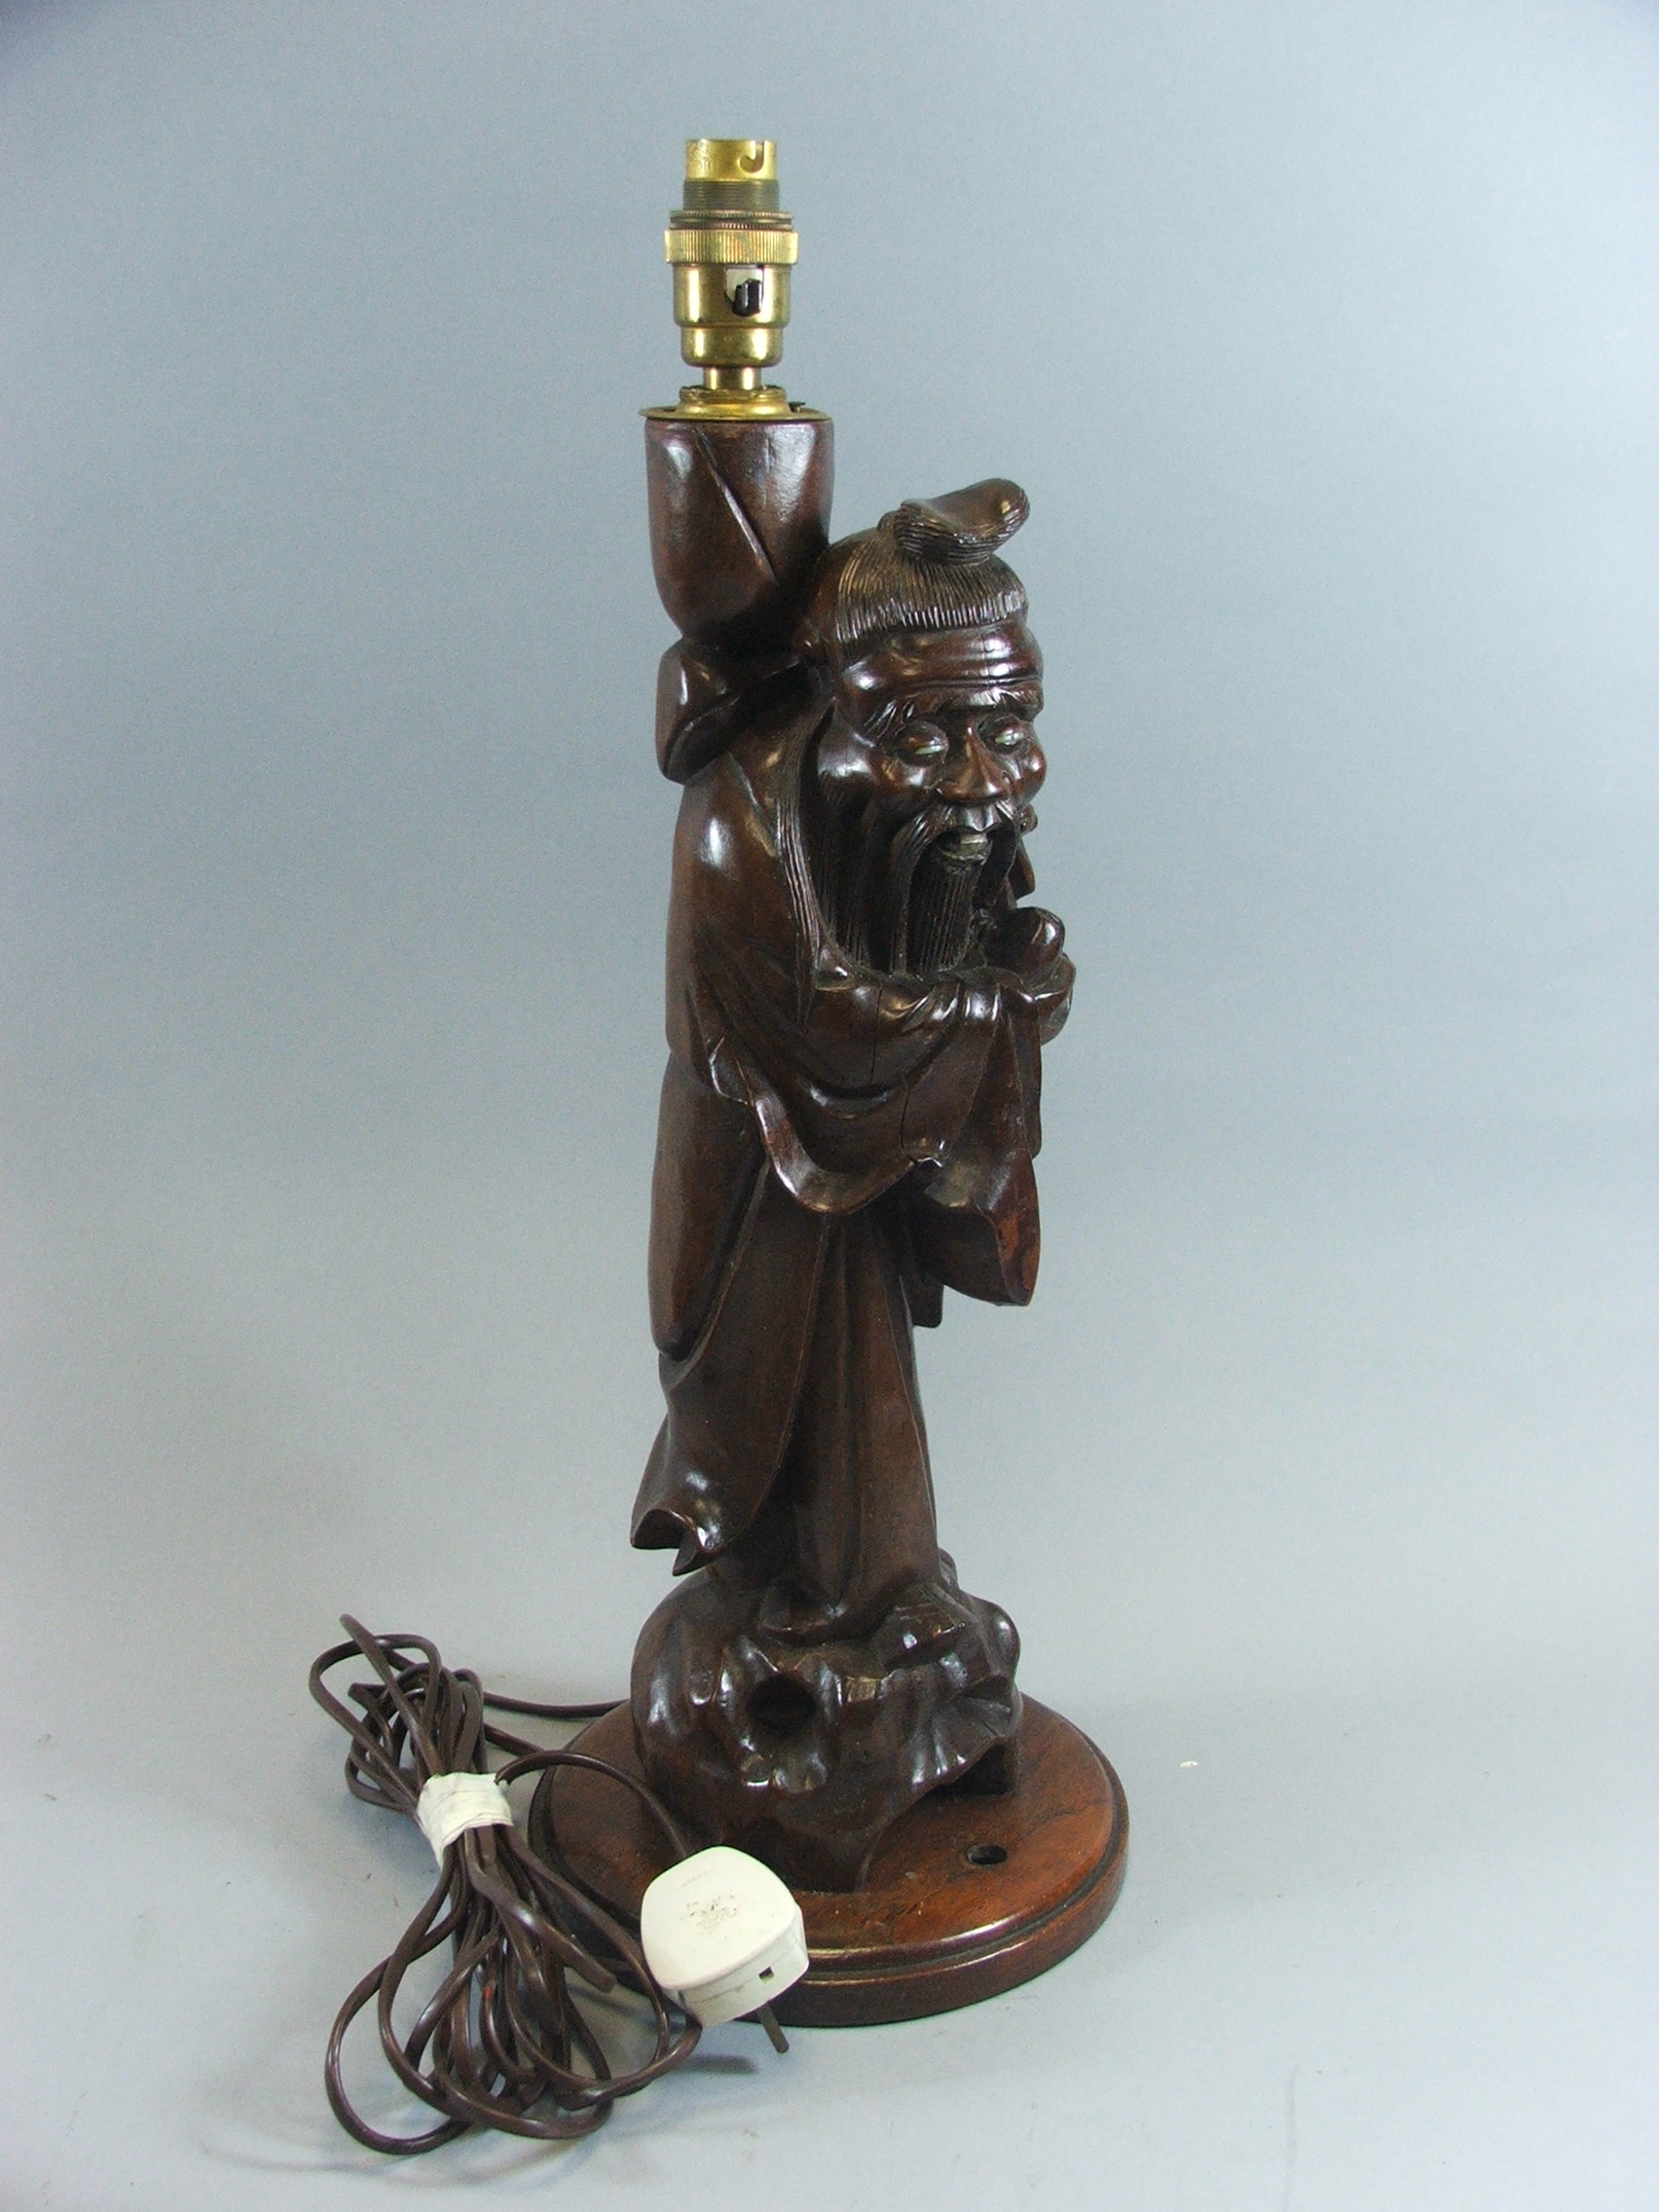 An Early 20th Century Chinese Carved Hardwood Table Lamp in the form of Shou Lao, Deity of